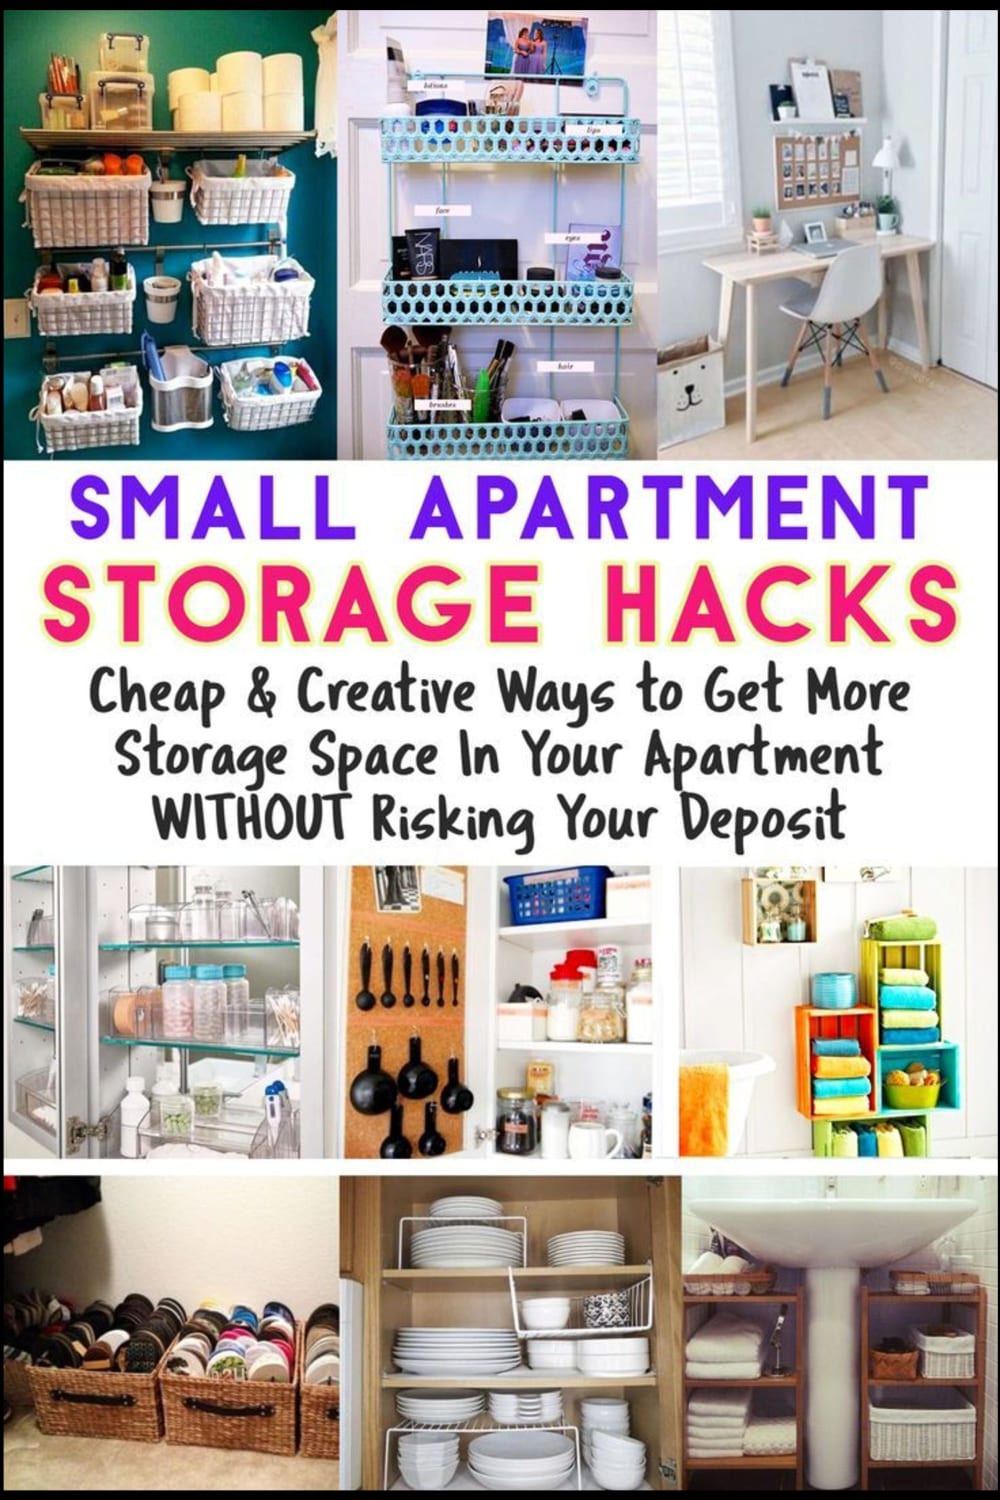 Small Apartment Storage Ideas -50 cheap and creative storage hacks for small spaces on a budget